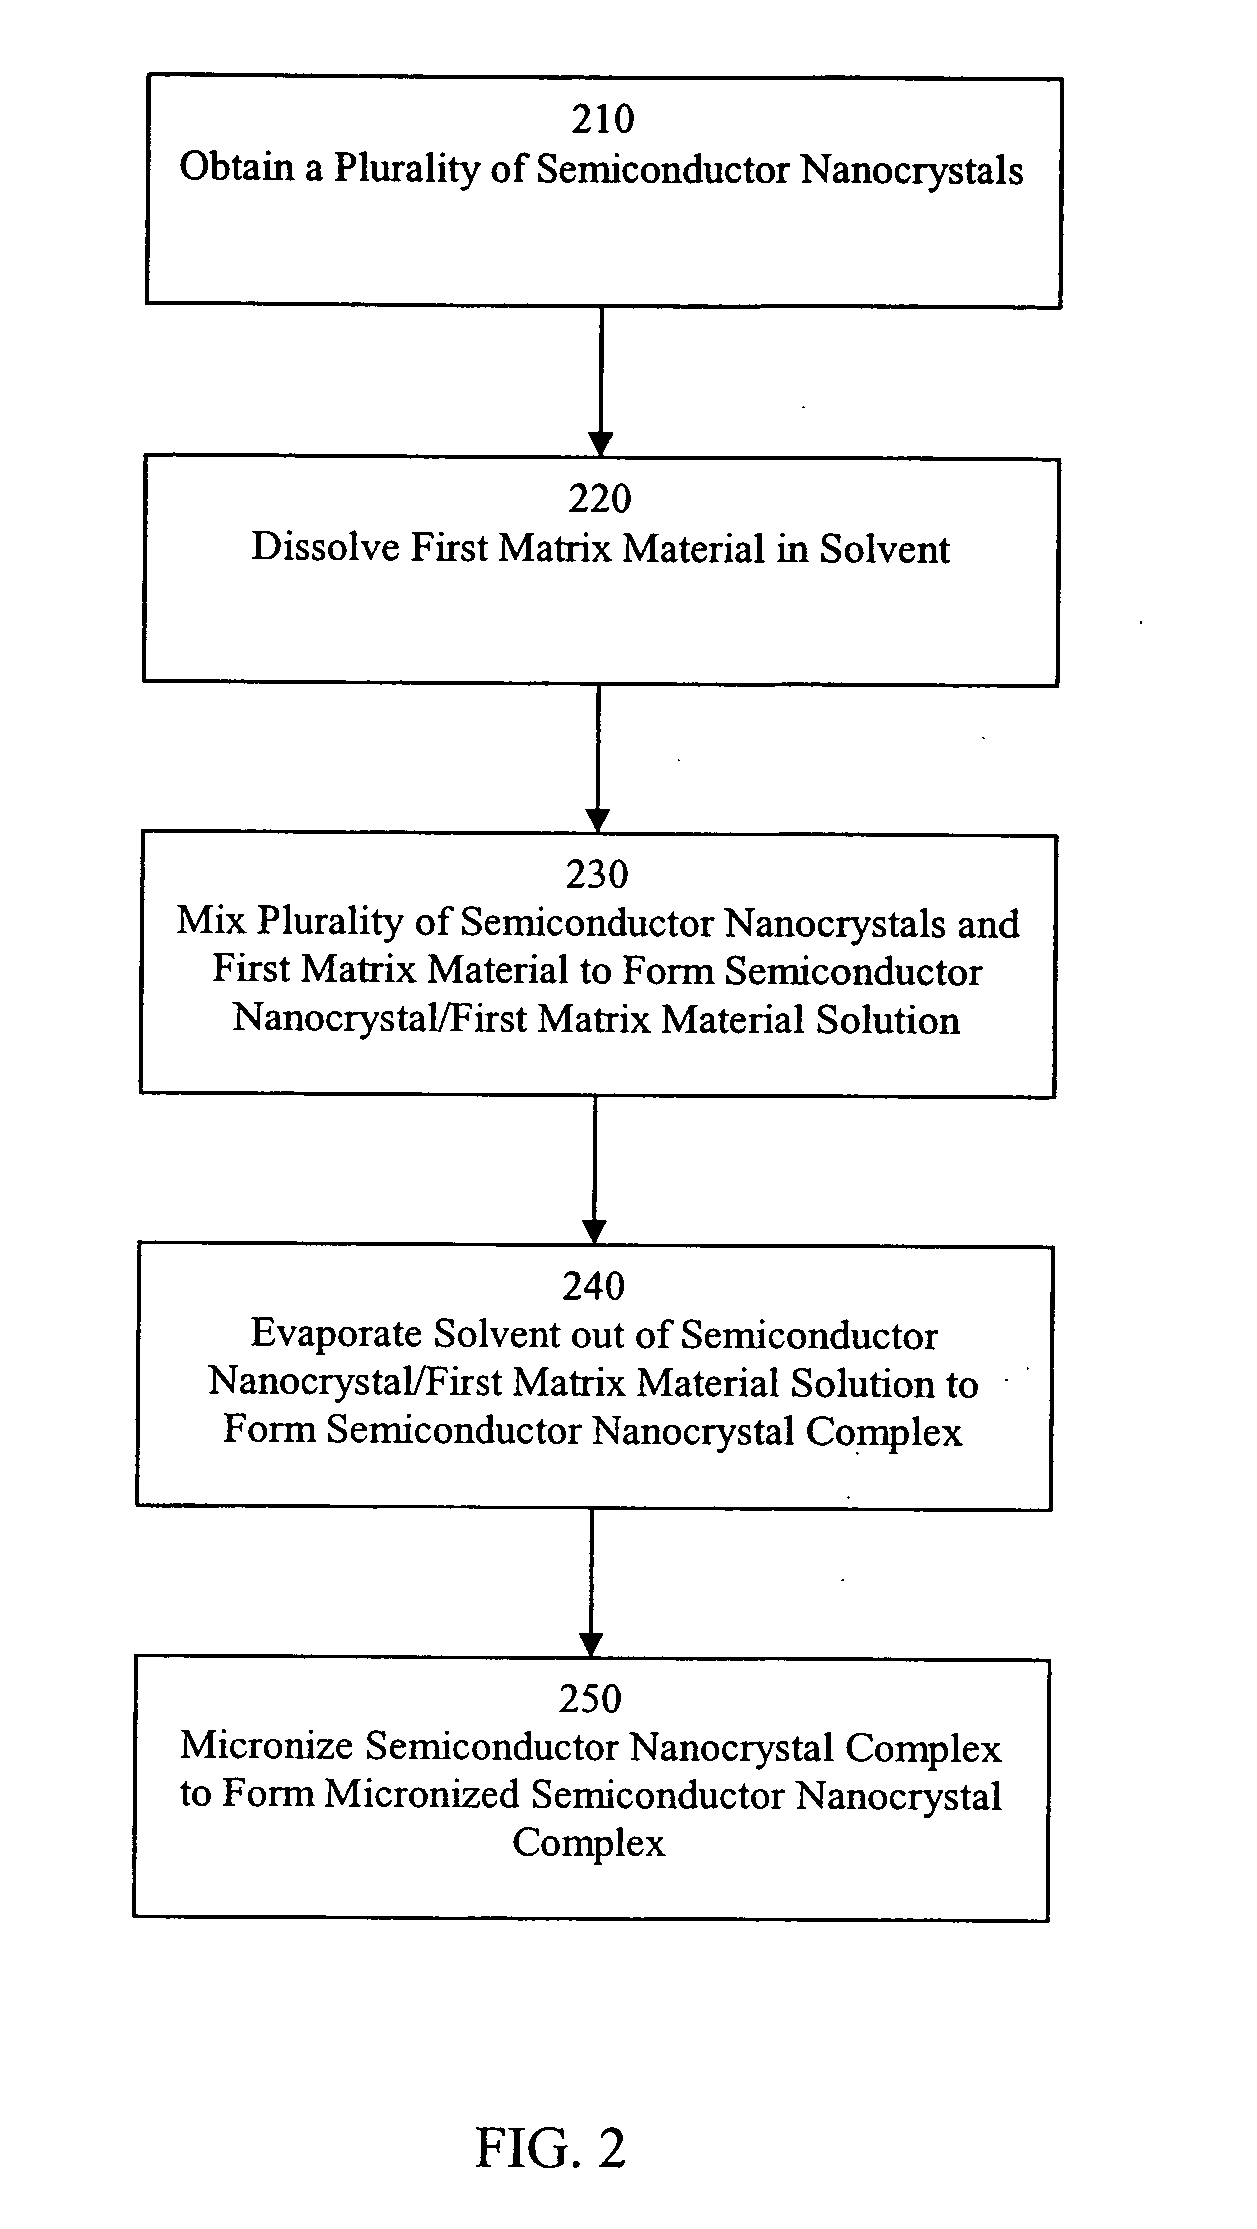 Micronized semiconductor nanocrystal complexes and methods of making and using same